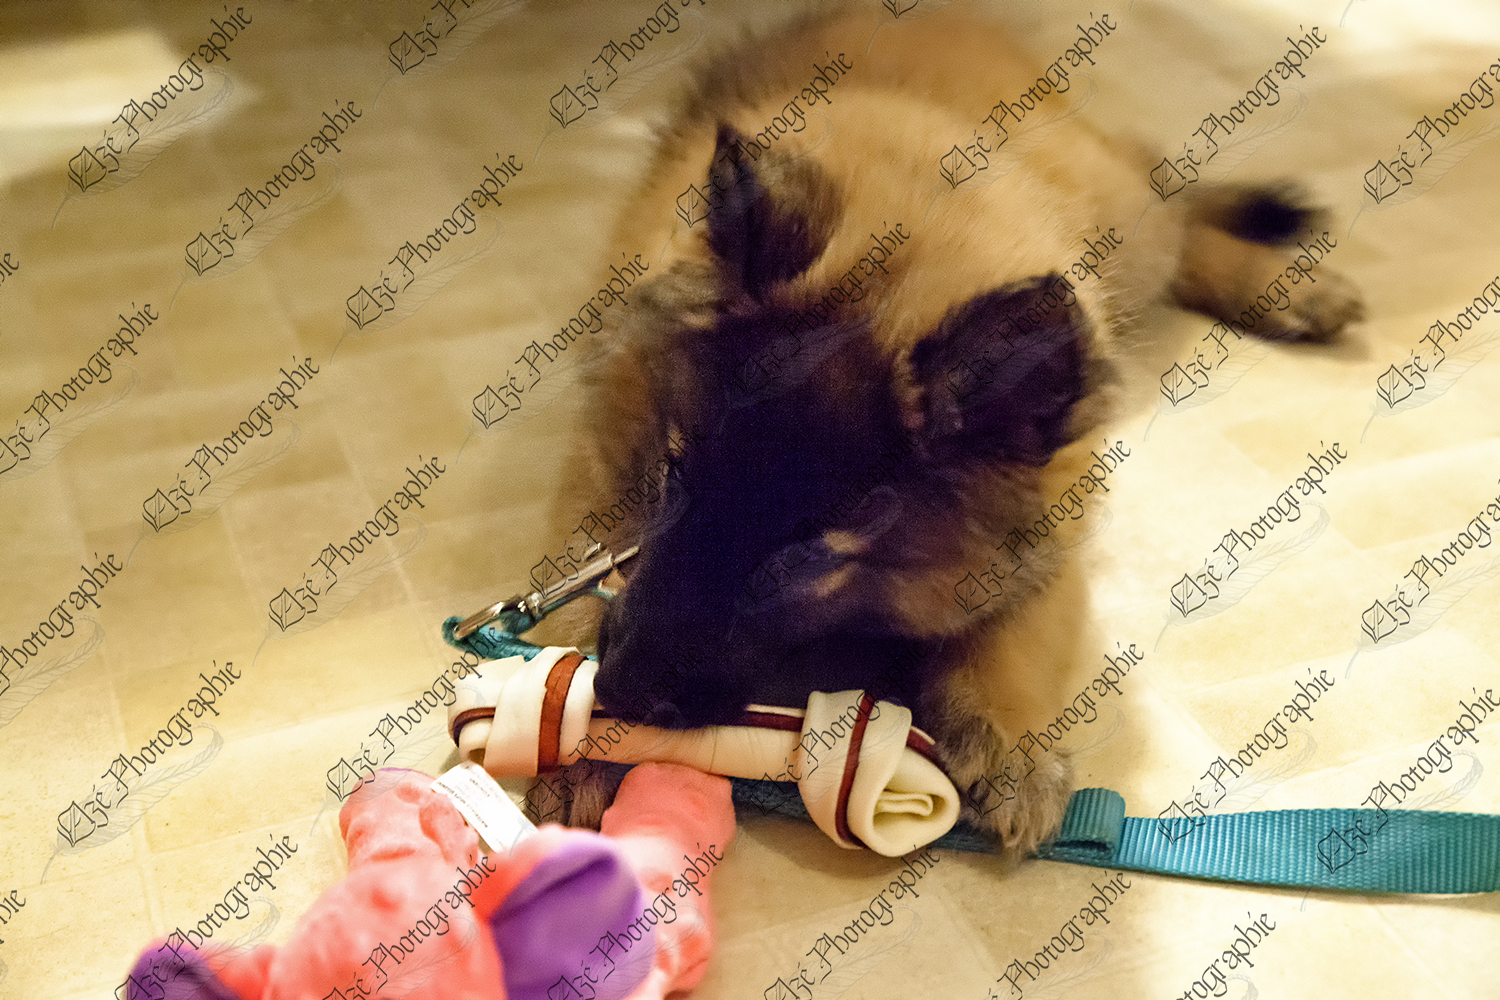 elze_photo_0043_bebe_berger_belge_chiot_puppy_playing